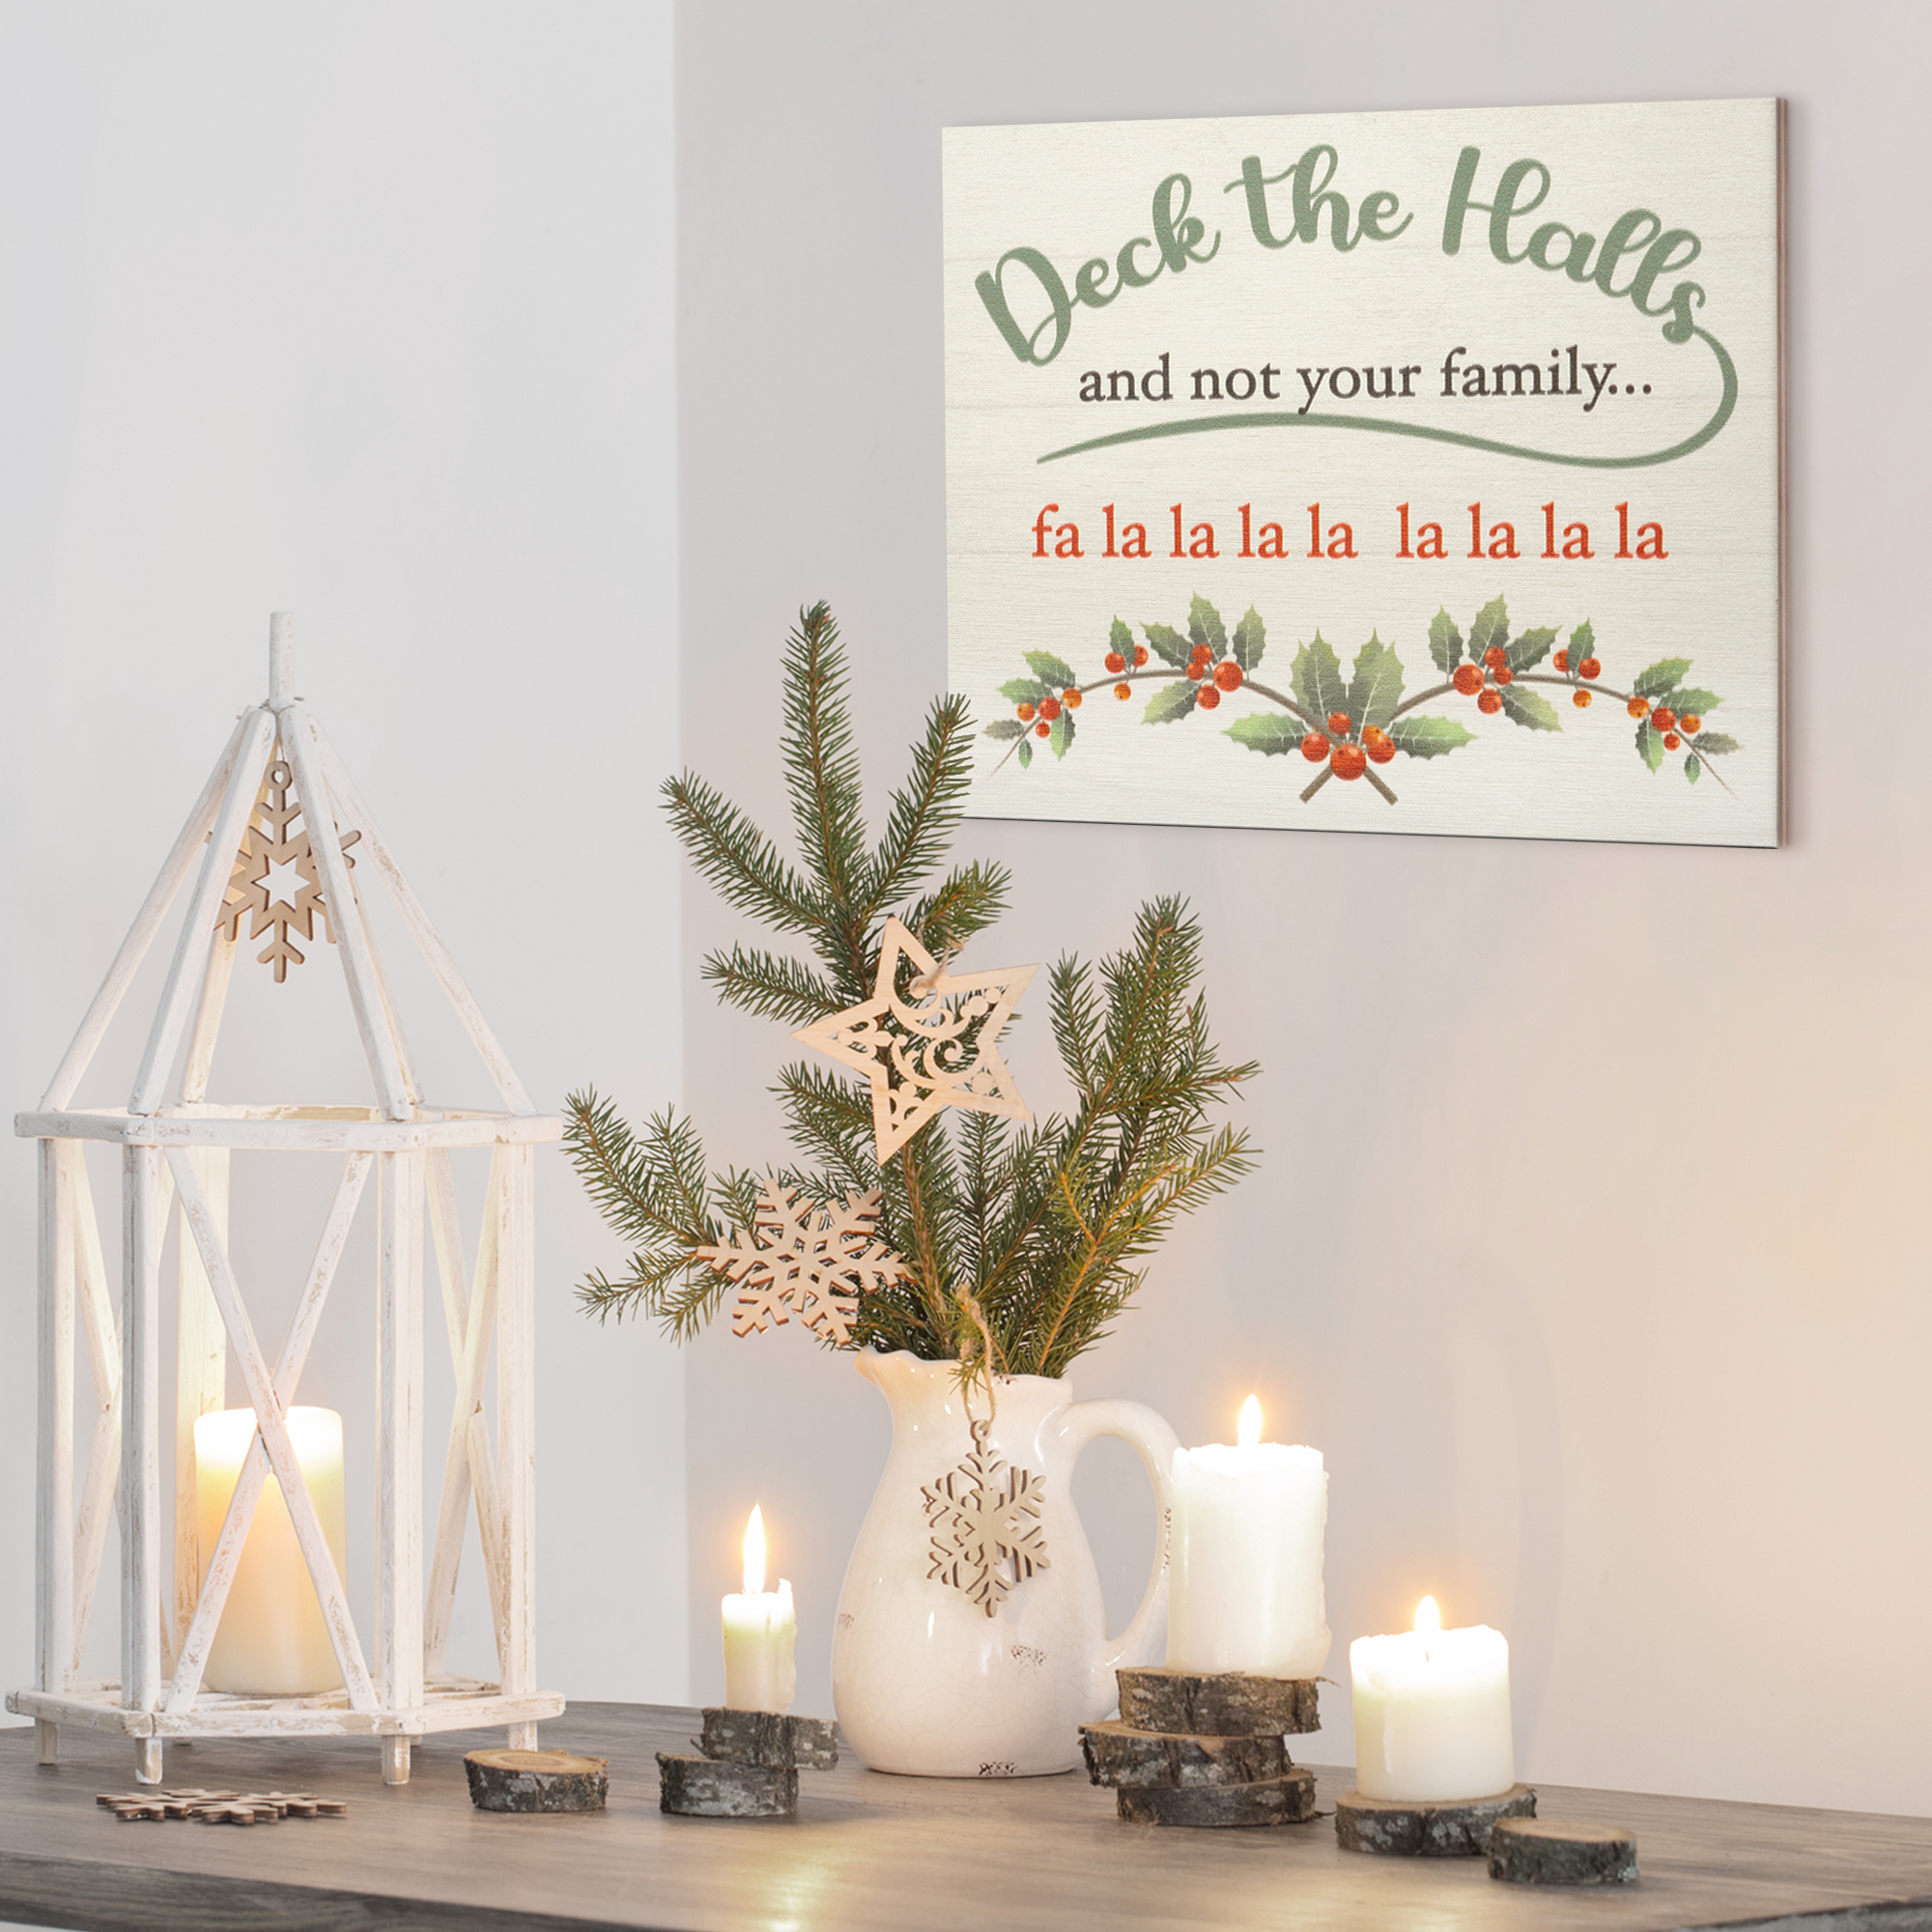 Deck the halls: Holiday decorating is reaching new heights - The Hustle